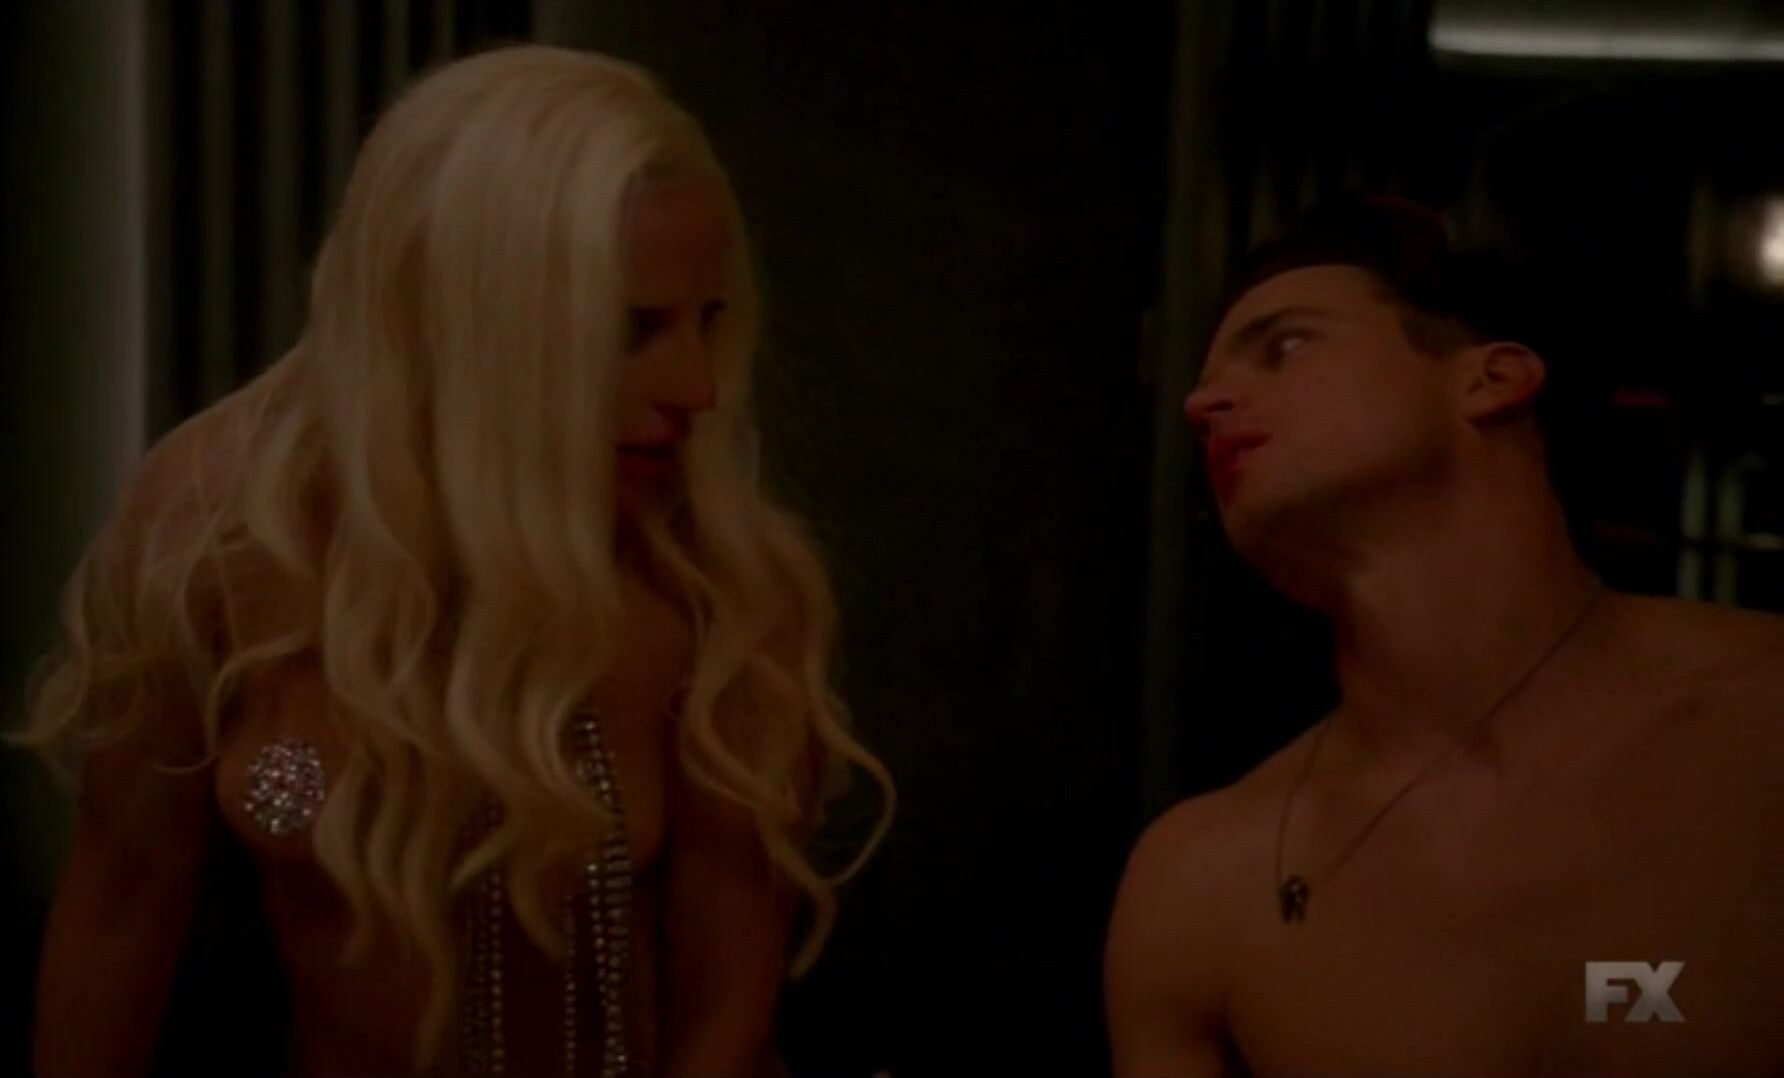 Brazilian Lady Gaga and the second beautiful actress do it in TV series American Horror Story Gay Fetish